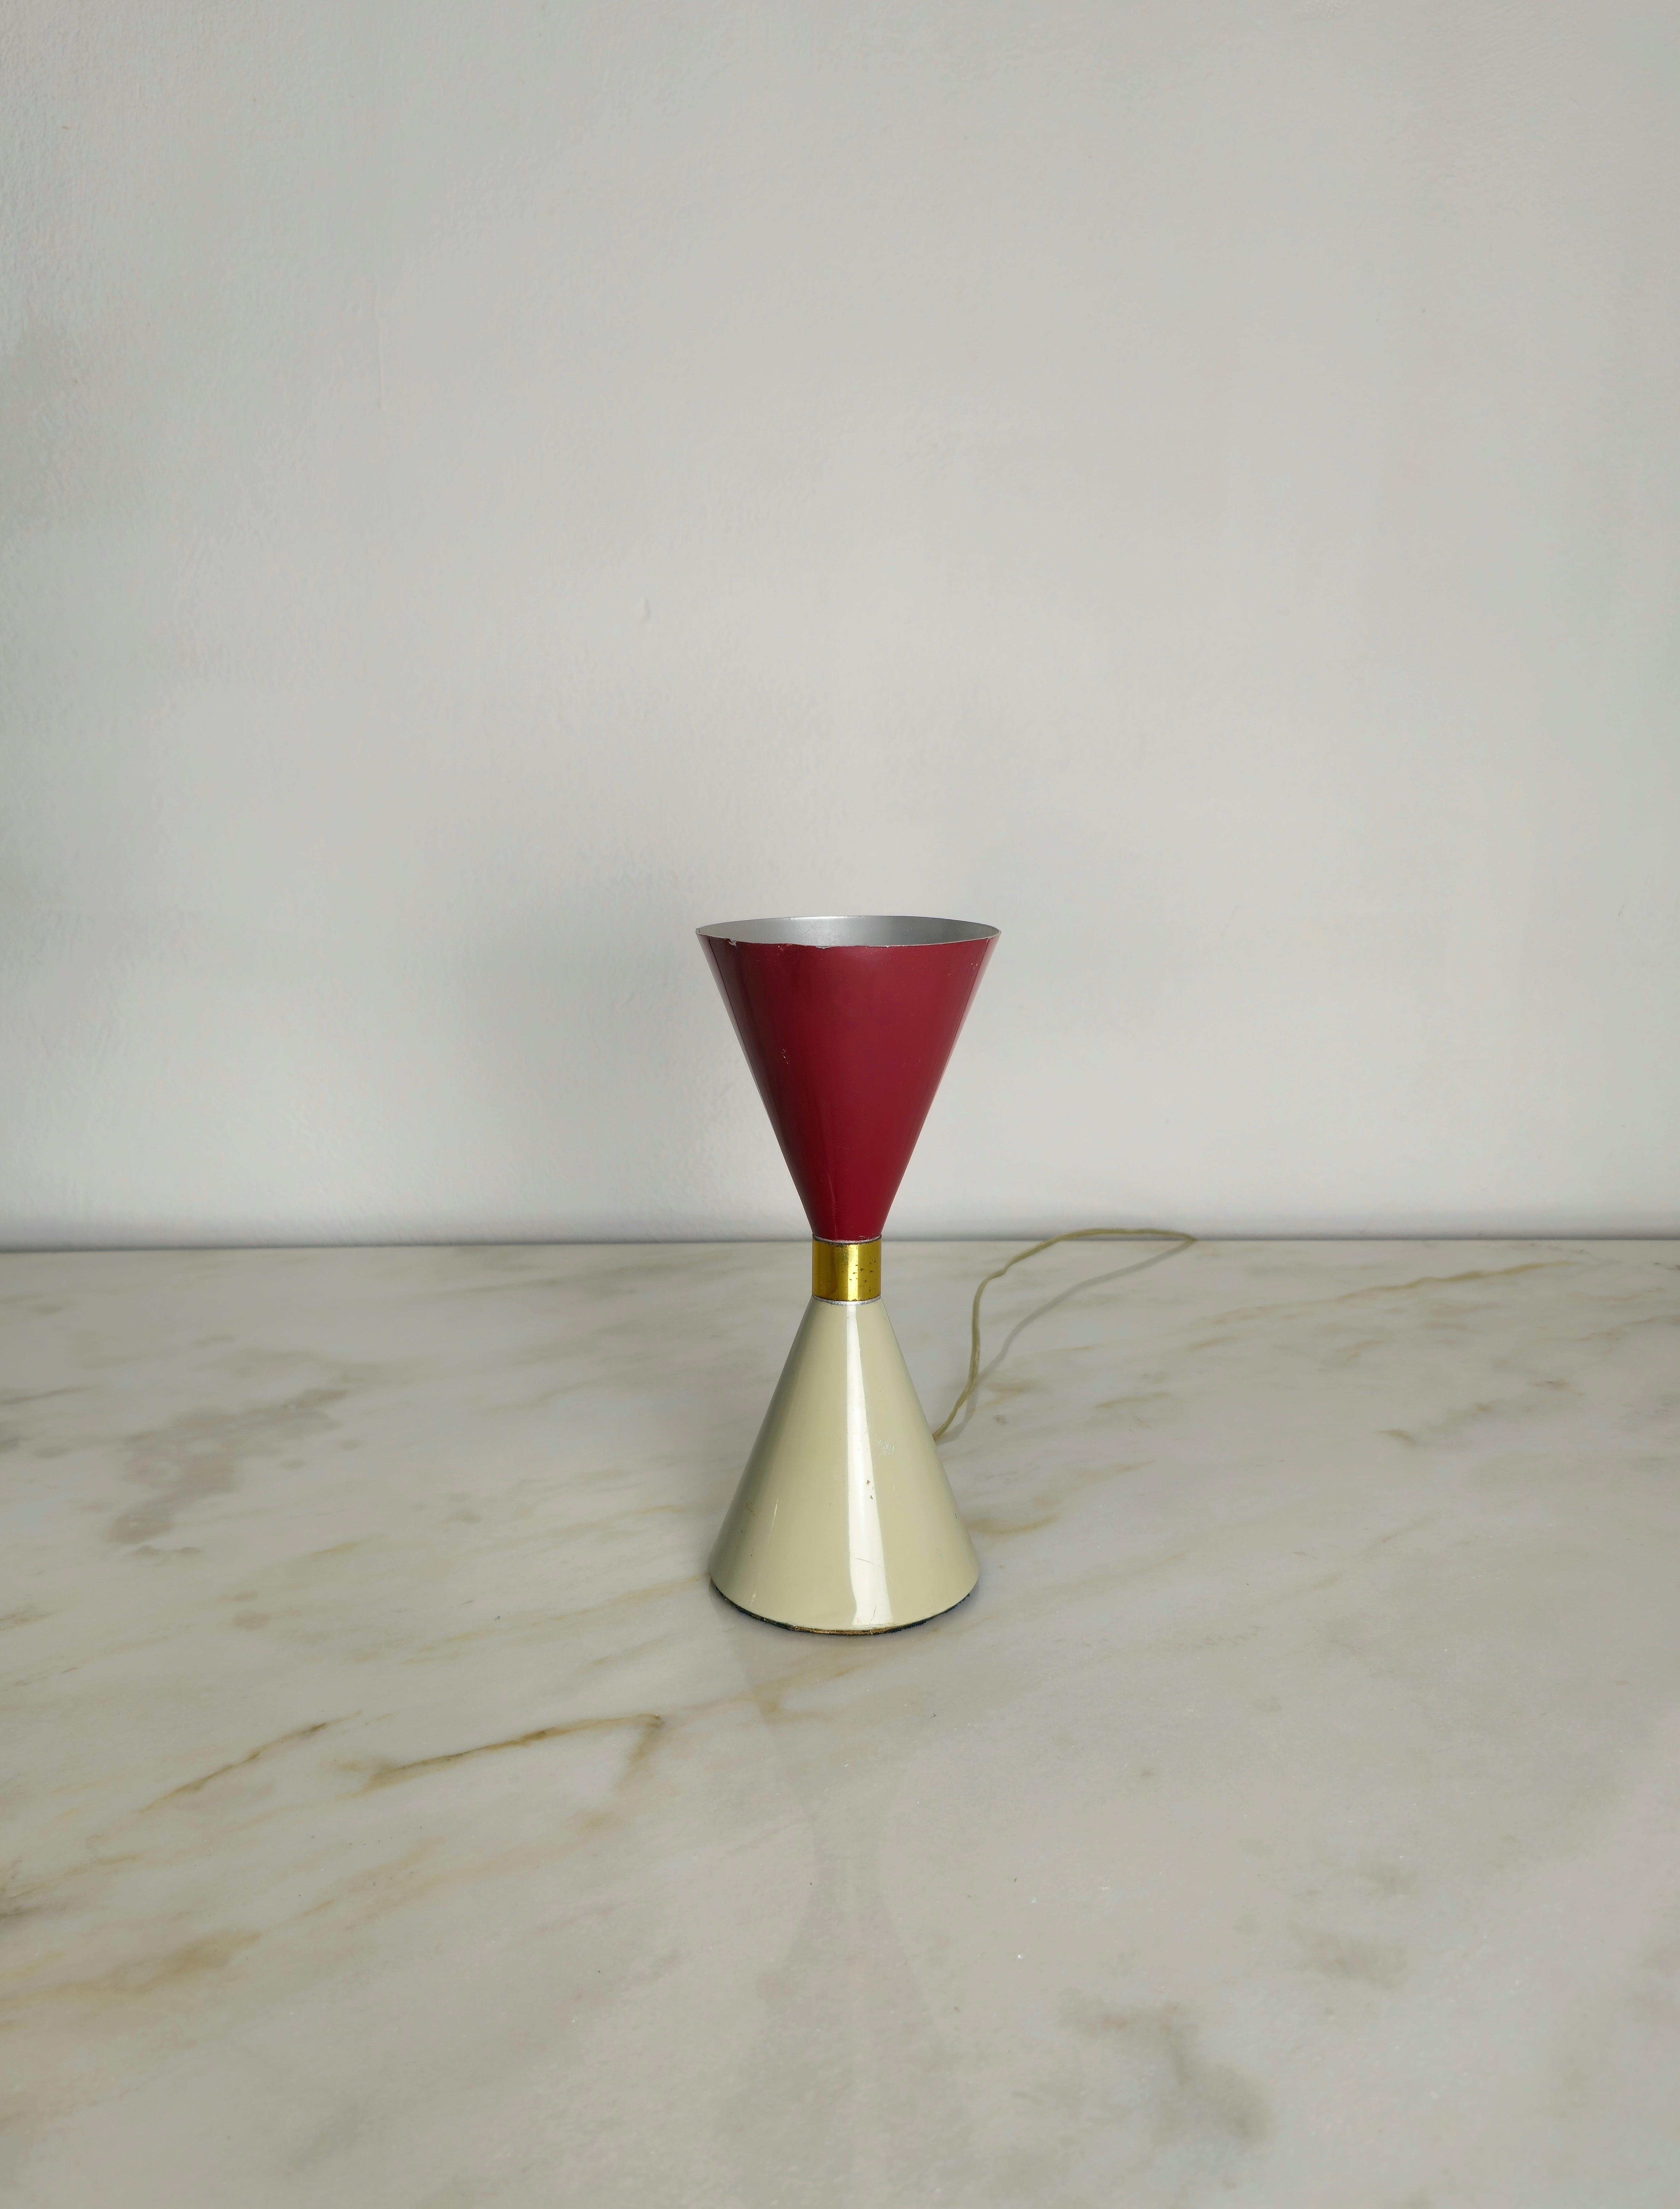 Table lamp with 1 E27 light in the Arredoluce style, made in Italy in the 1950s.
The hourglass-shaped lamp was made of enamelled aluminum in shades of red and gray.



Note: We try to offer our customers an excellent service even in shipments all